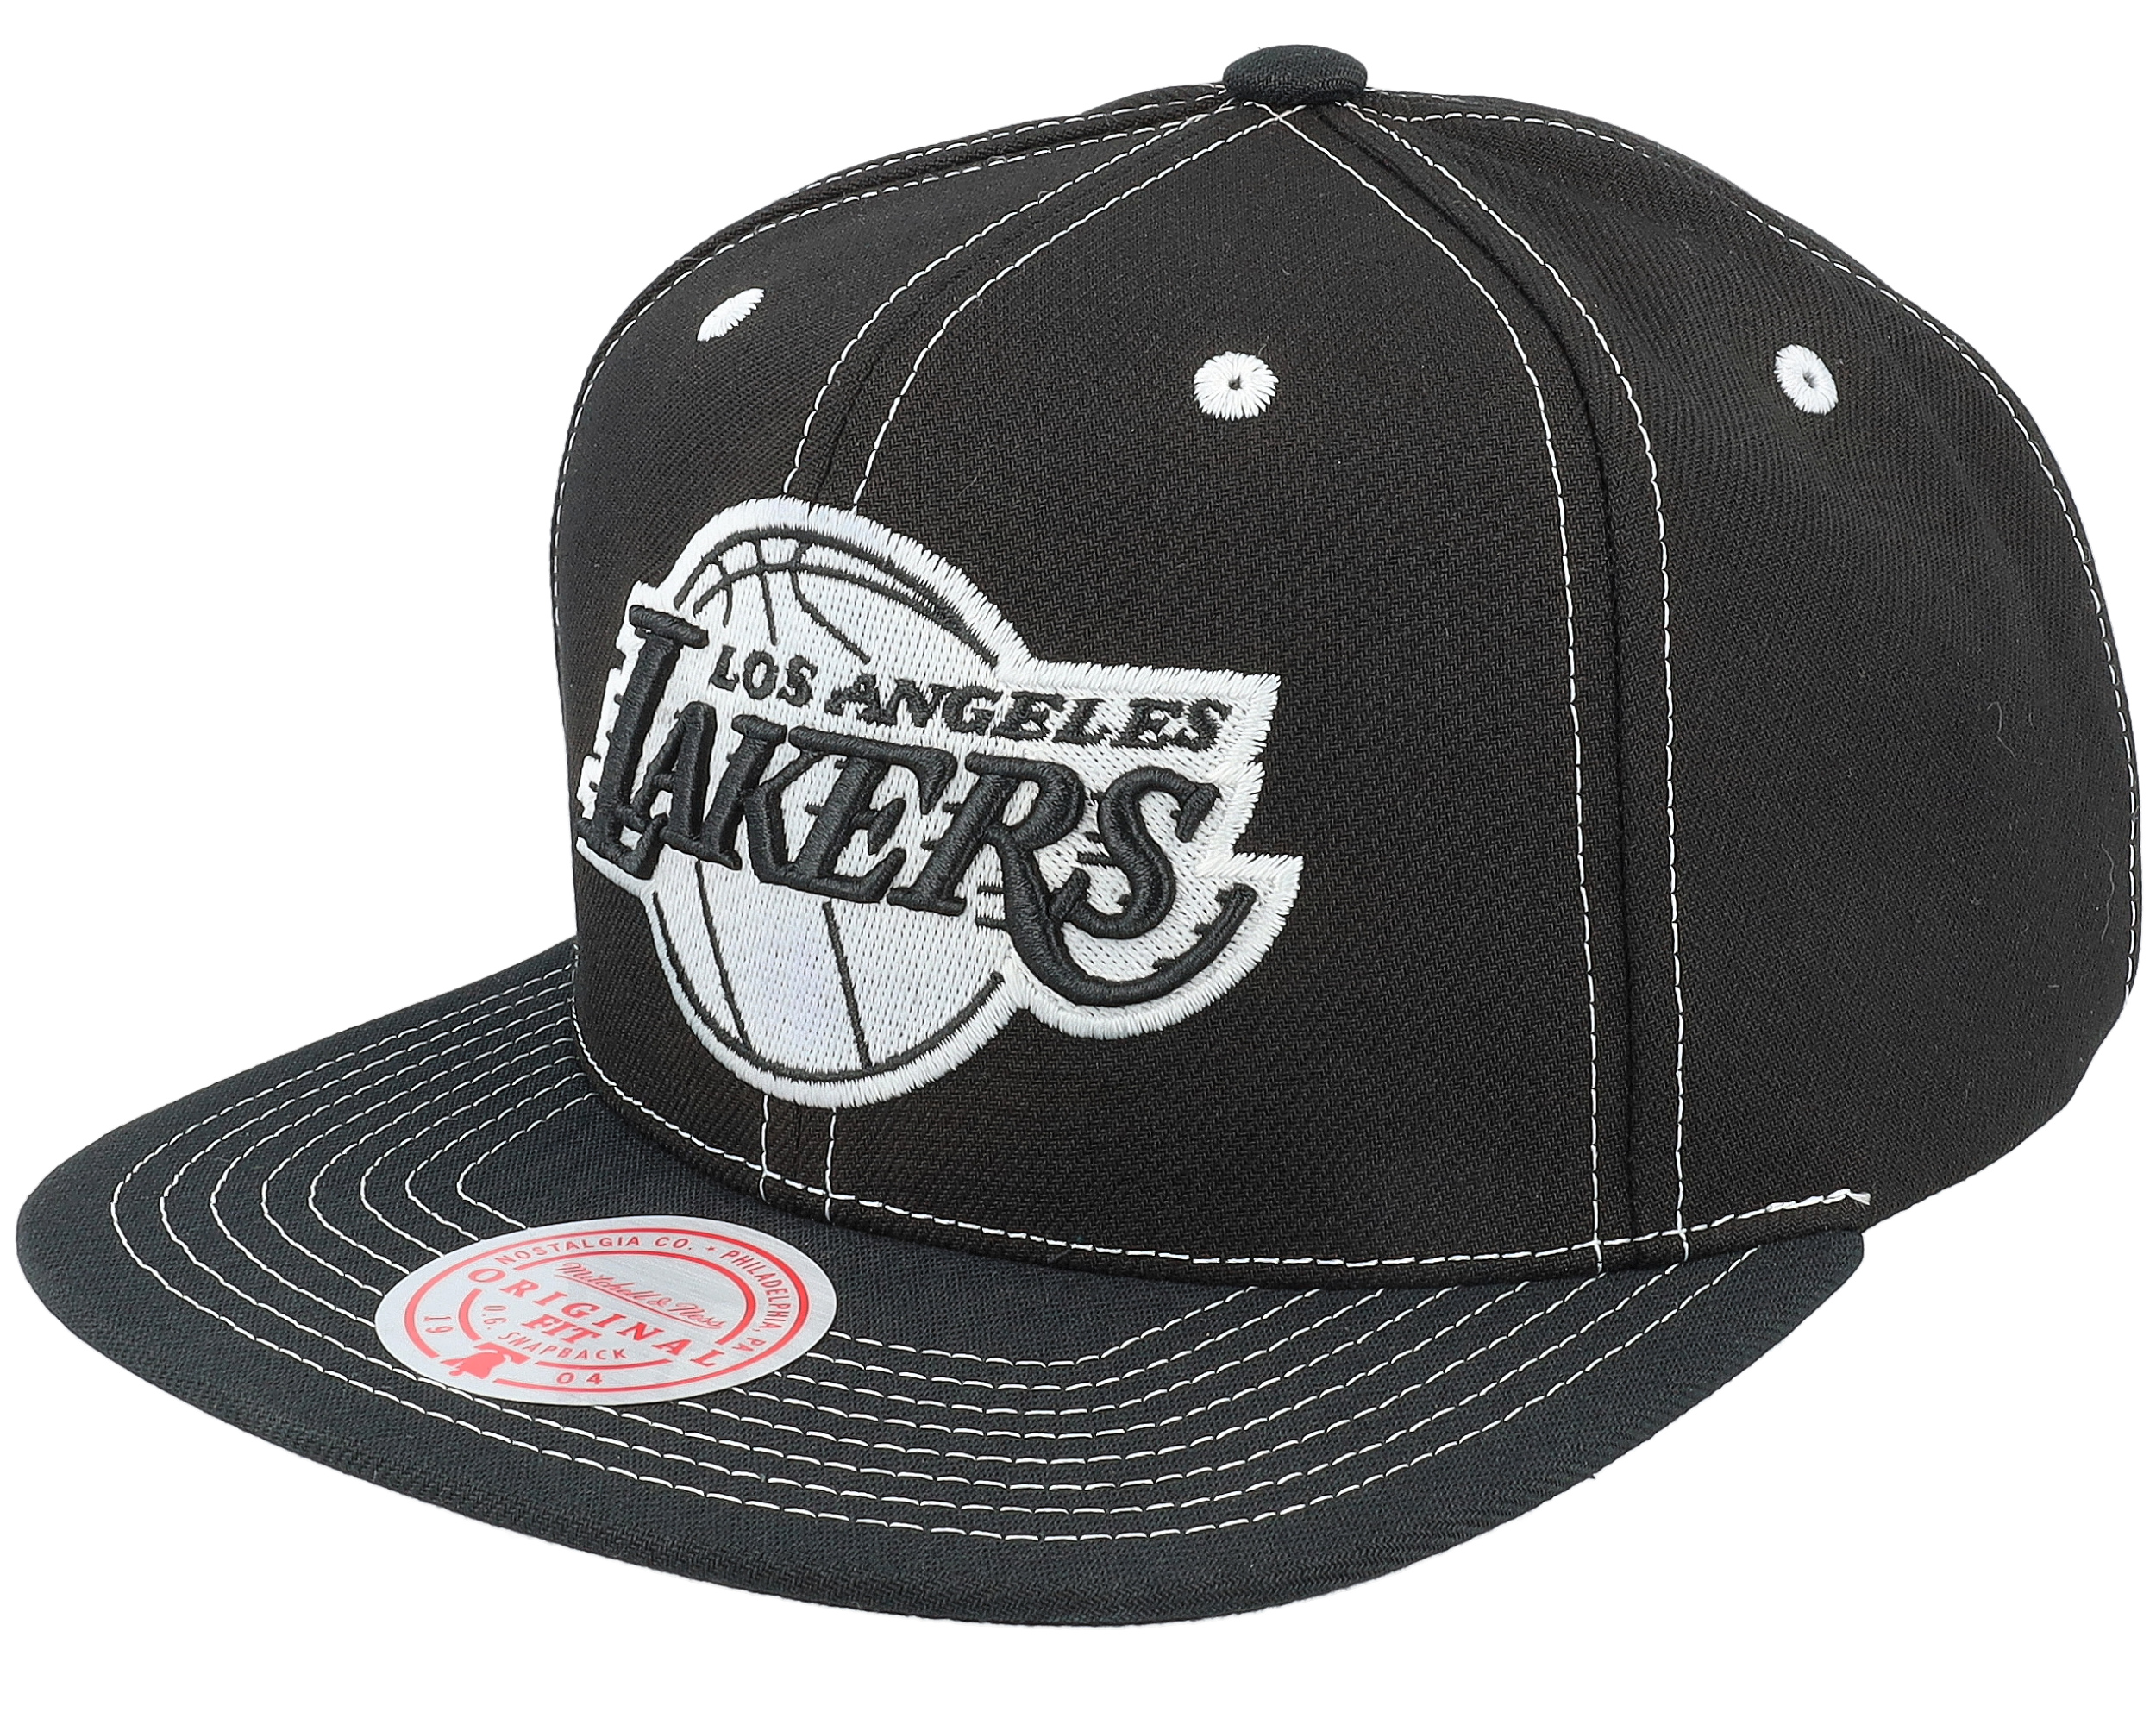 MITCHELL & NESS LOS ANGELES LAKERS BASEBALL CAP COLOR BLACK